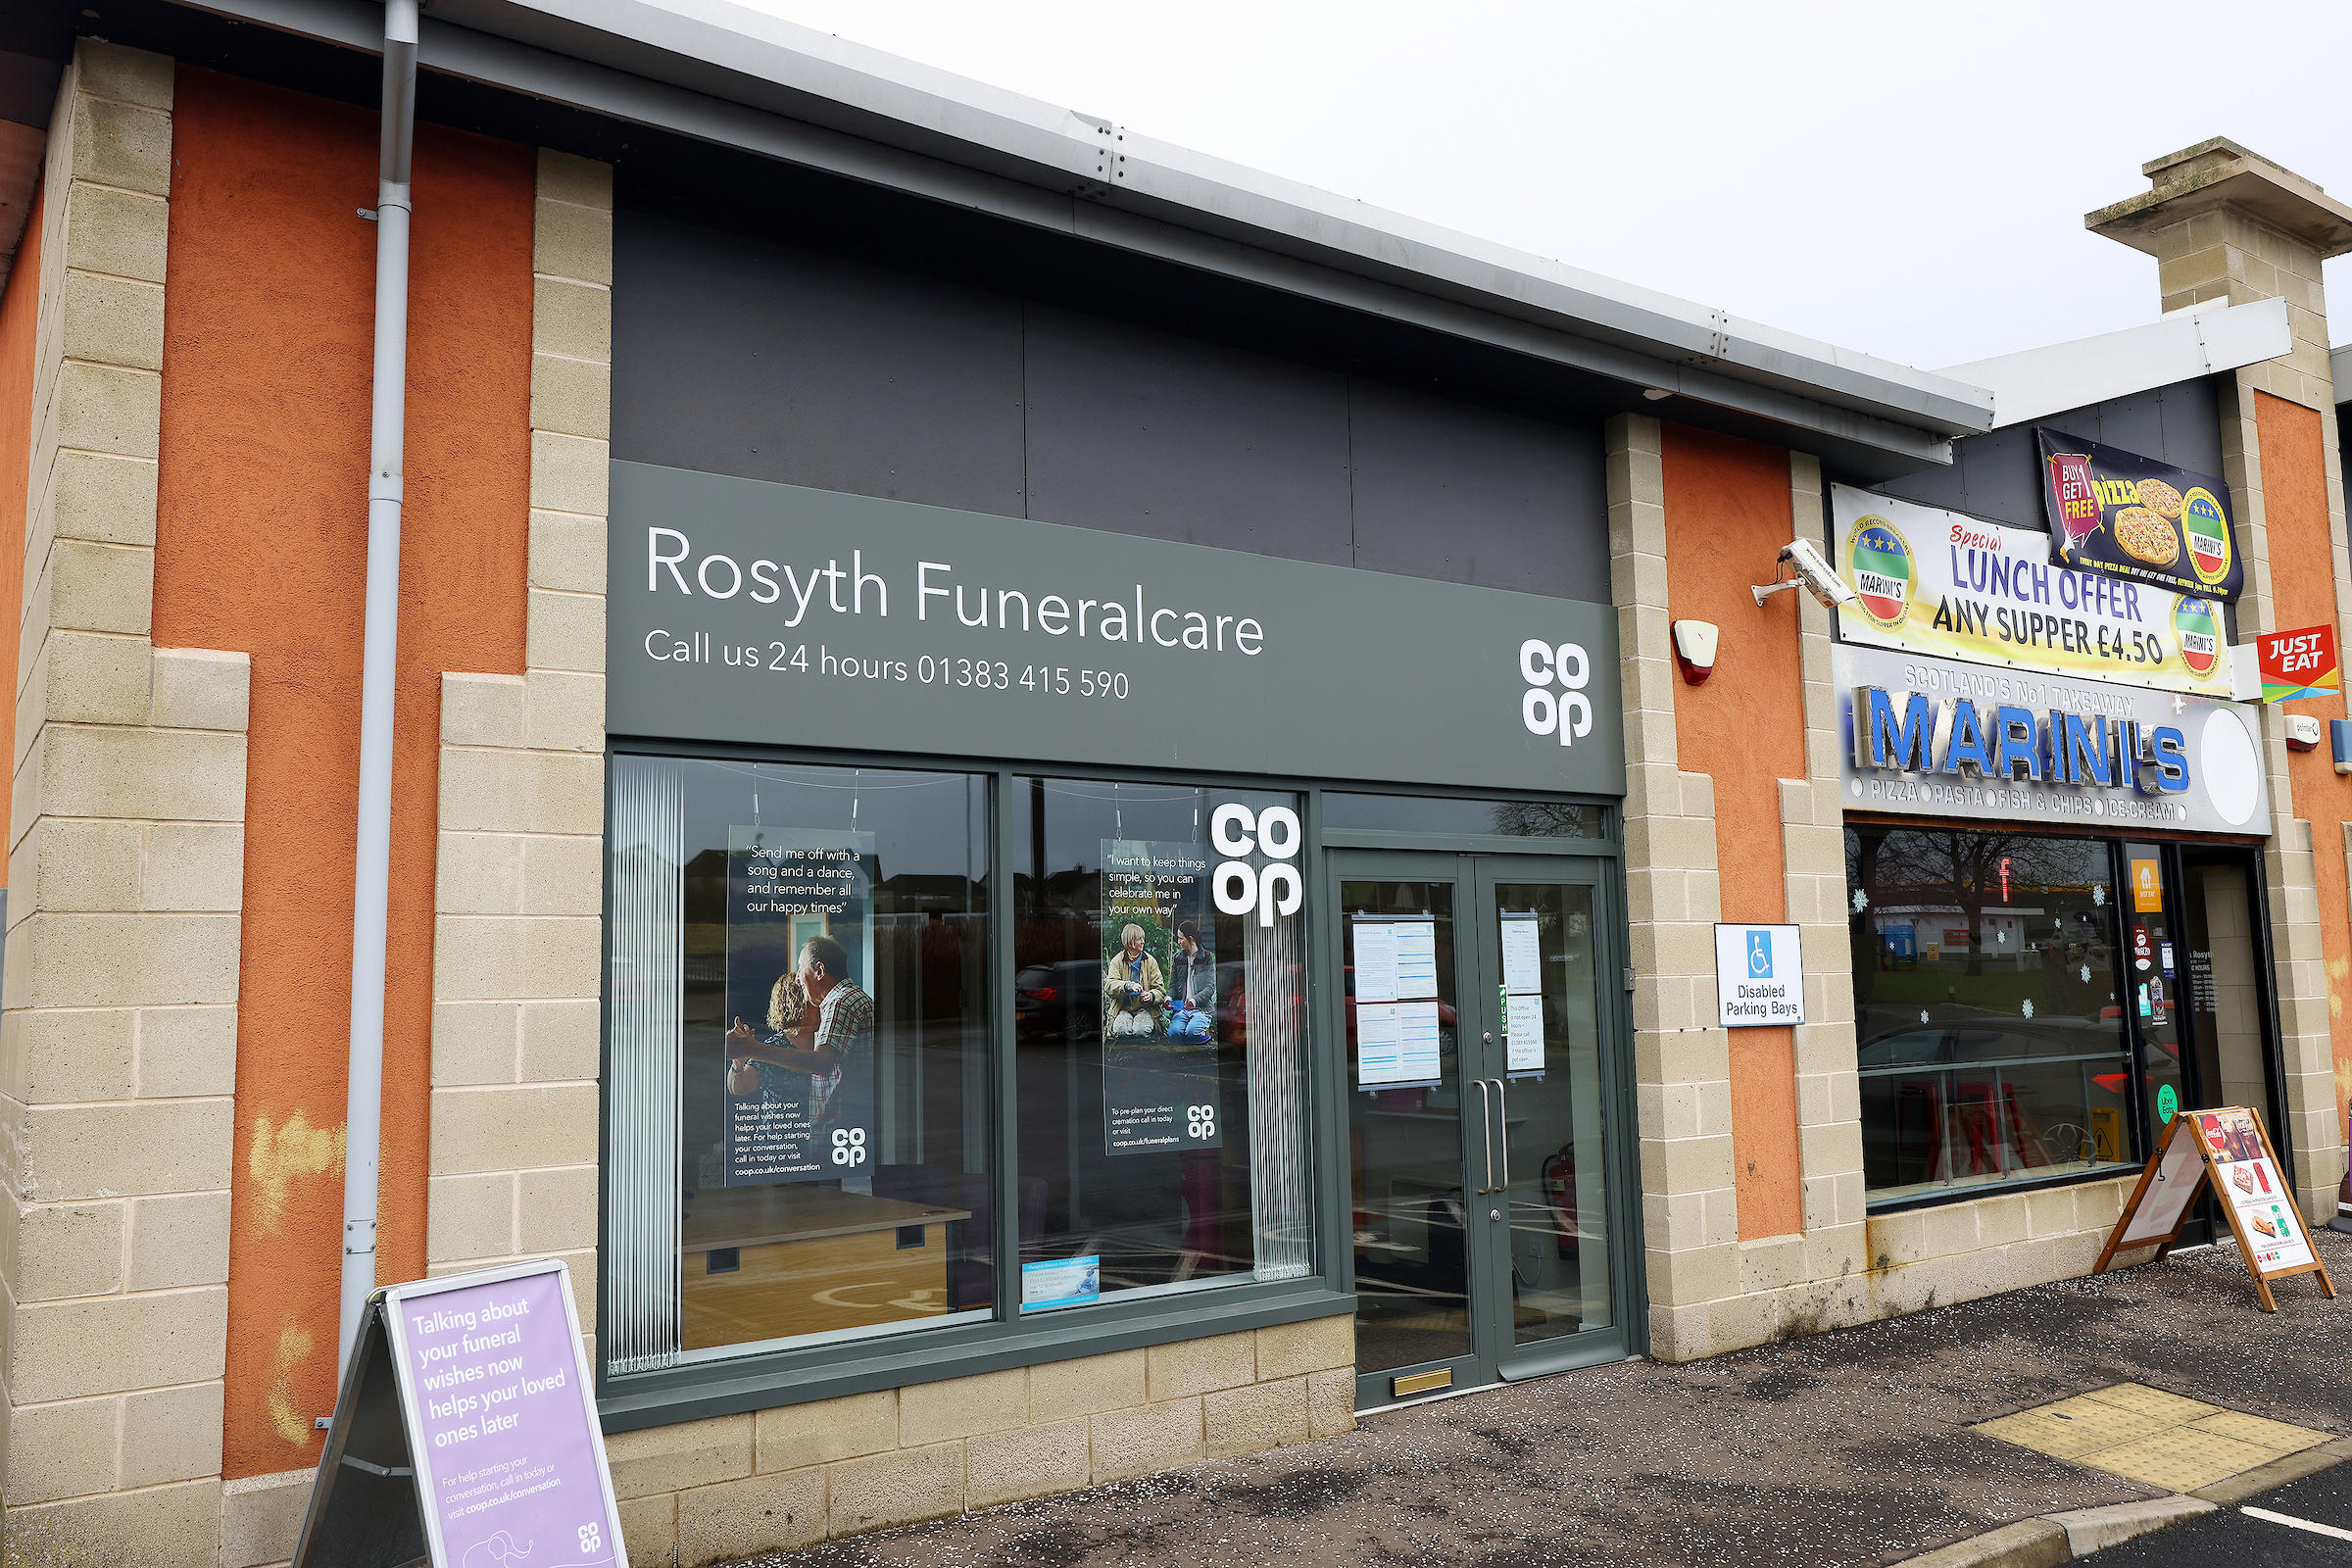 Images Co-op Funeralcare, Rosyth